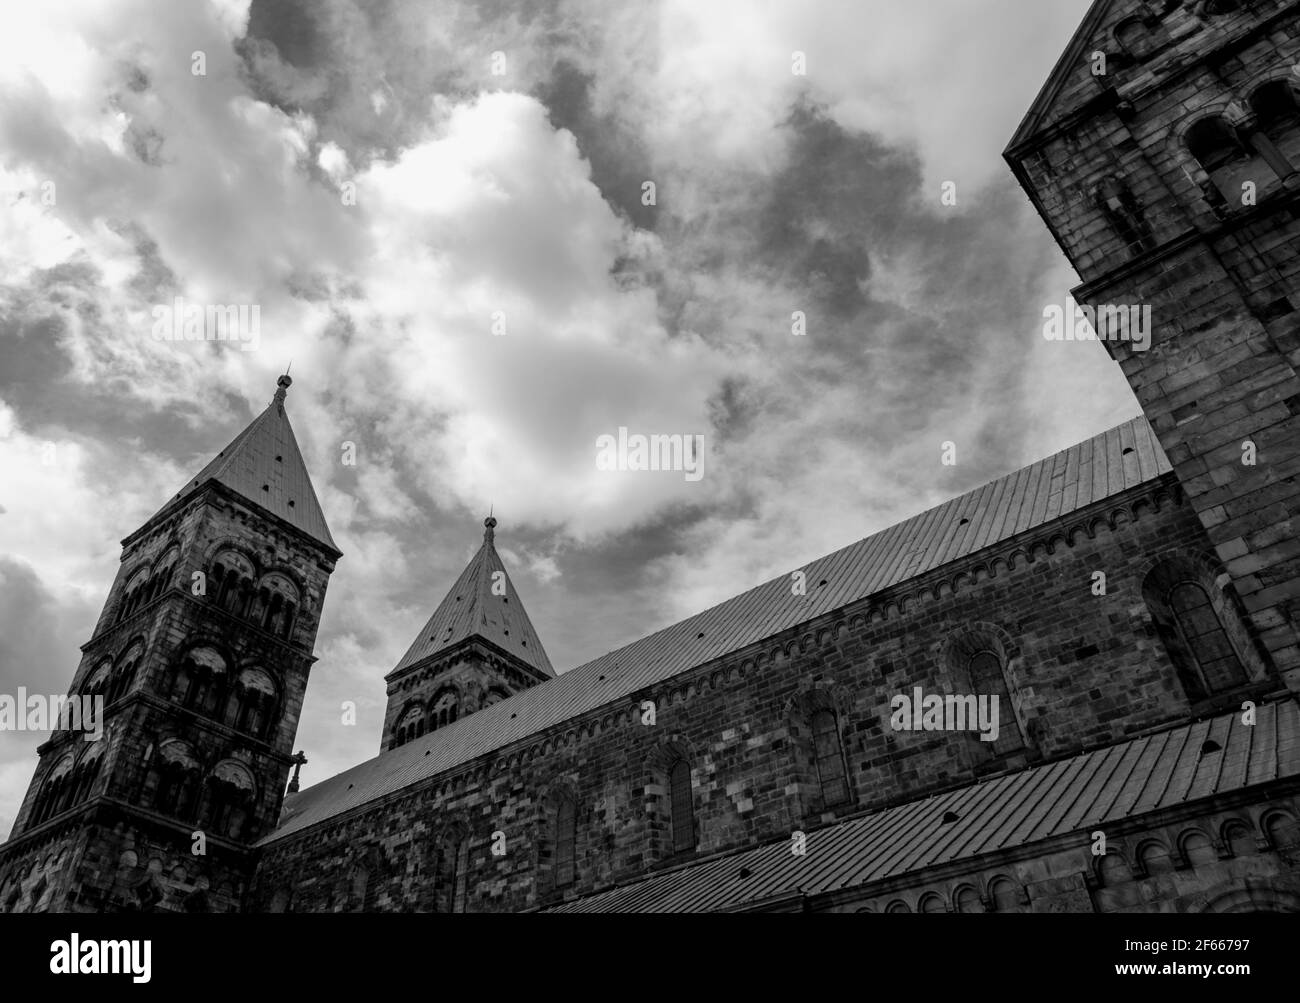 The south-eastern elevation of Lund Cathedral, Lund, Sweden, from the side, against a background of dramatic clouds. B&W Stock Photo